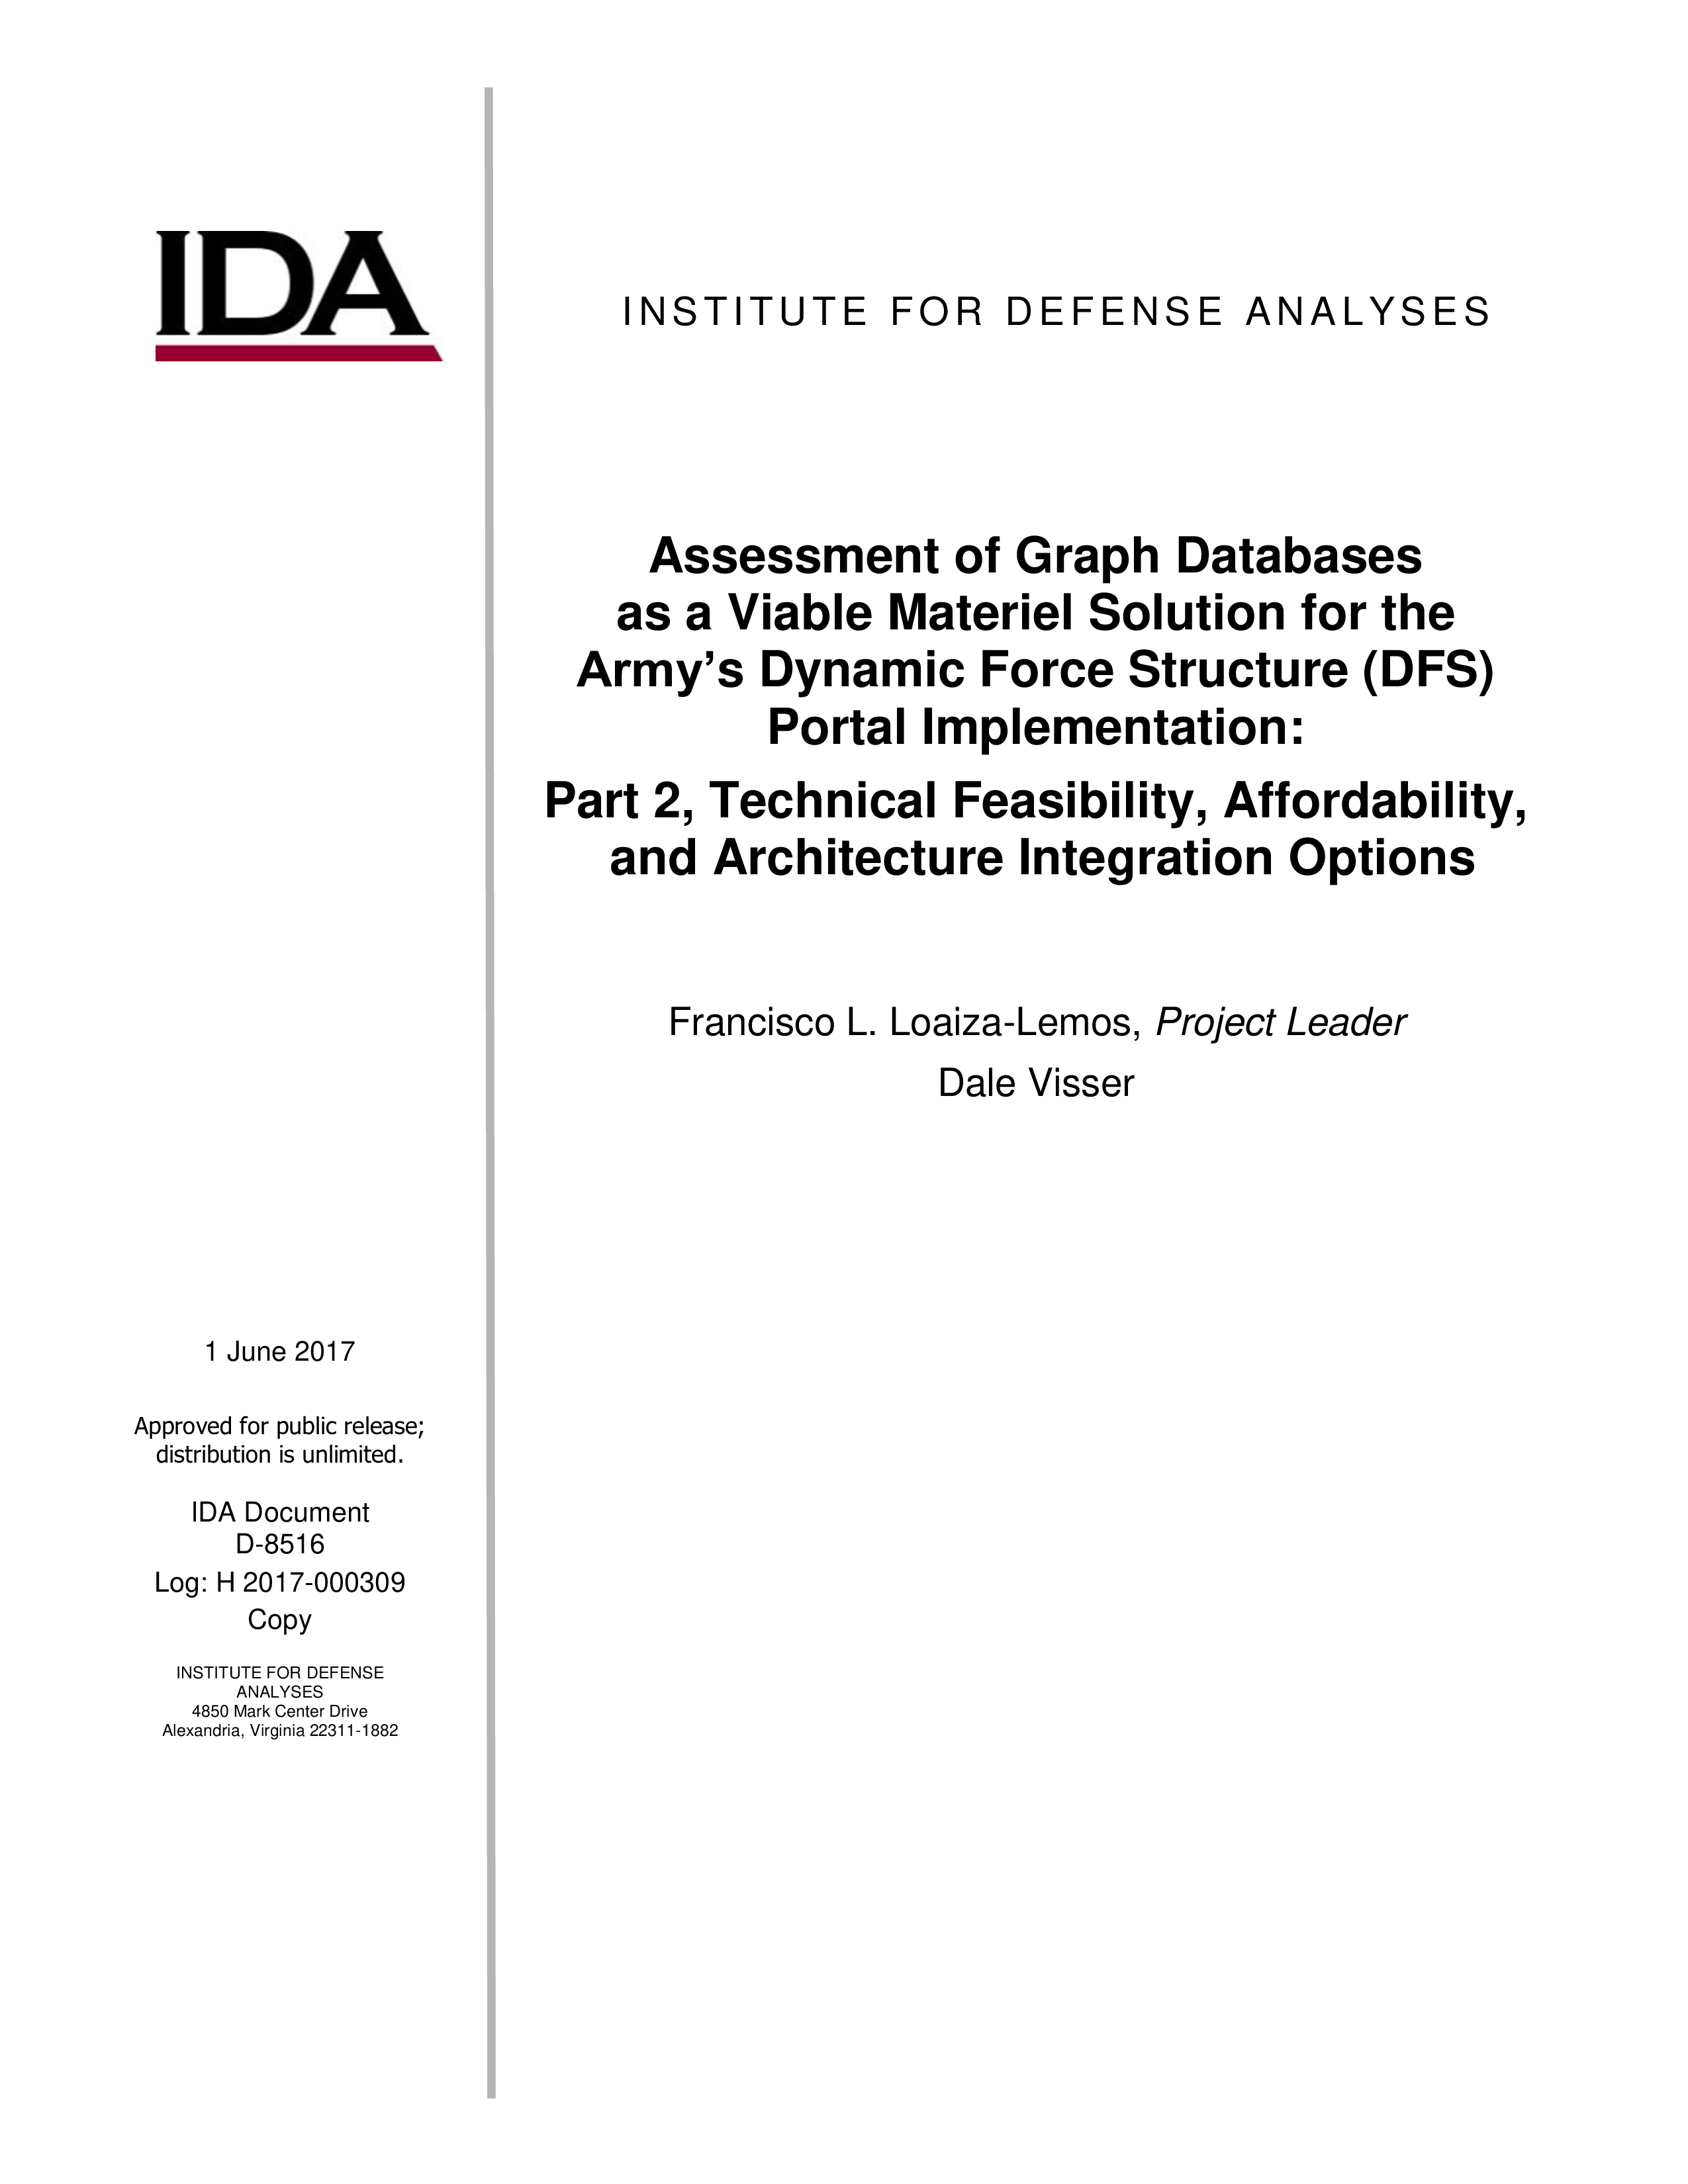 Assessment of Graph Databases as a Viable Materiel Solution for the Army’s Dynamic Force Structure (DFS) Portal Implementation: Part 2, Technical Feasibility, Affordability, and Architecture Integration Options